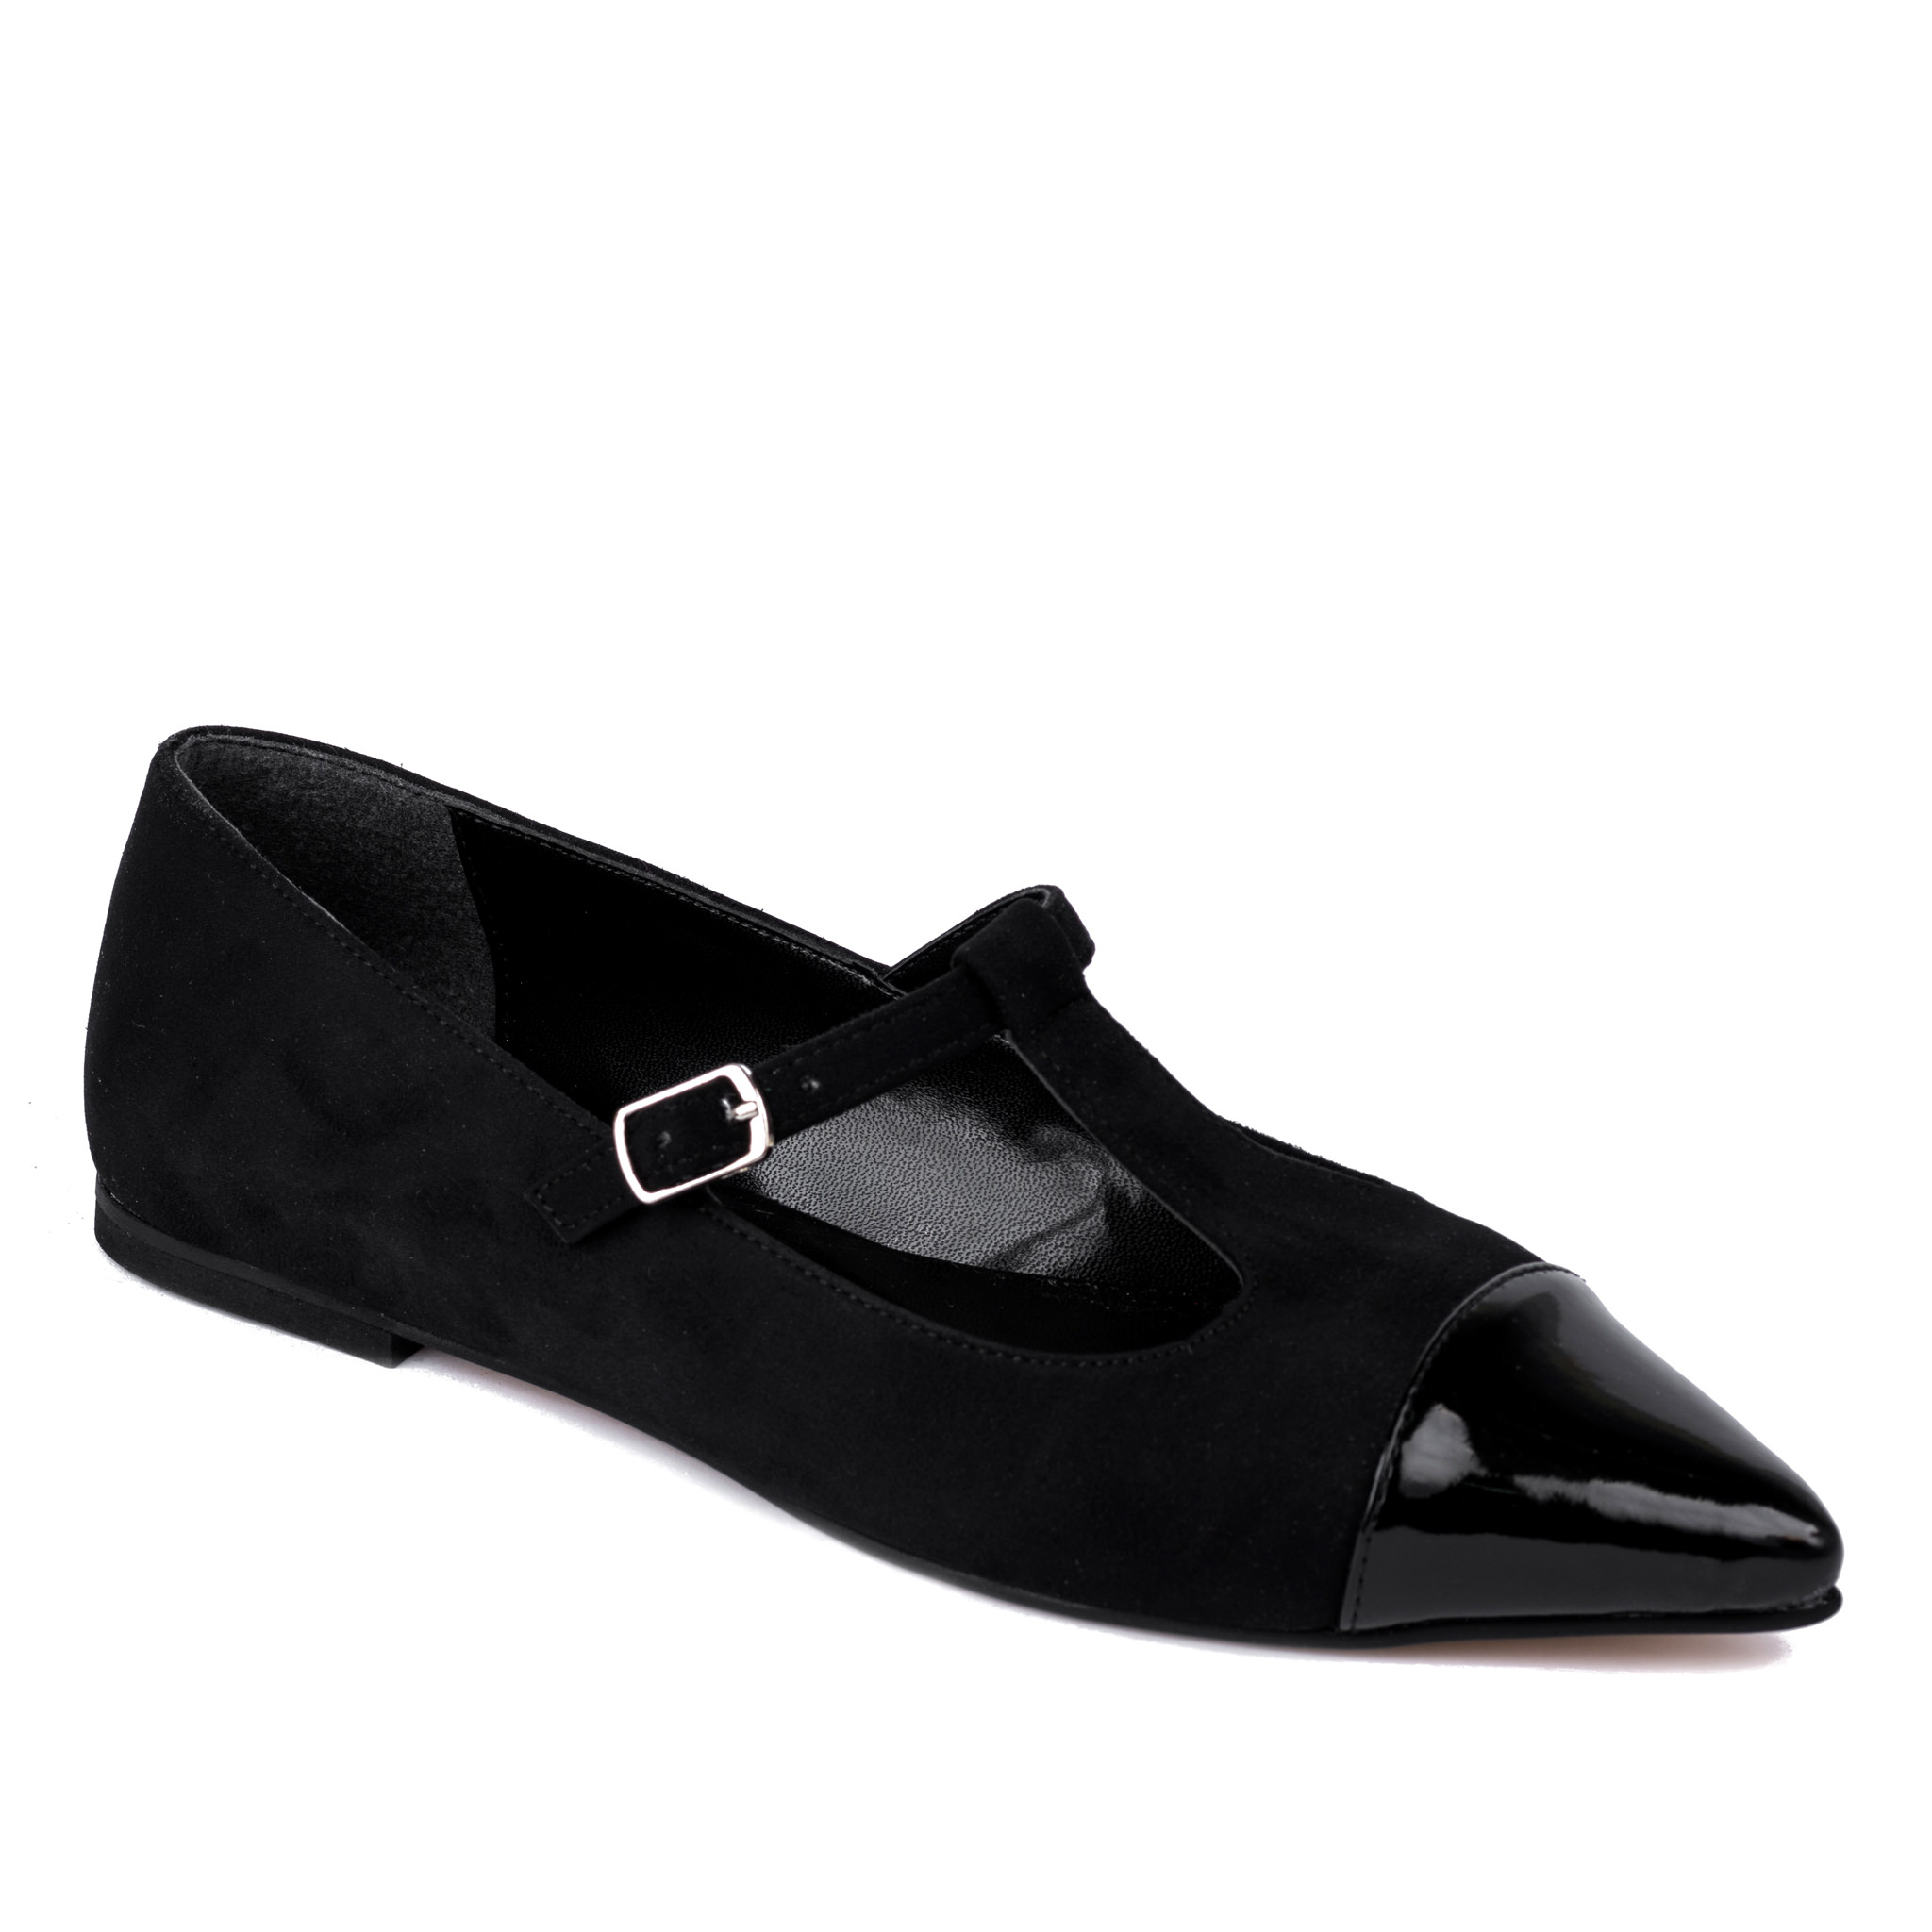 VELOUR POINTED FLATS WITH BELT - BLACK